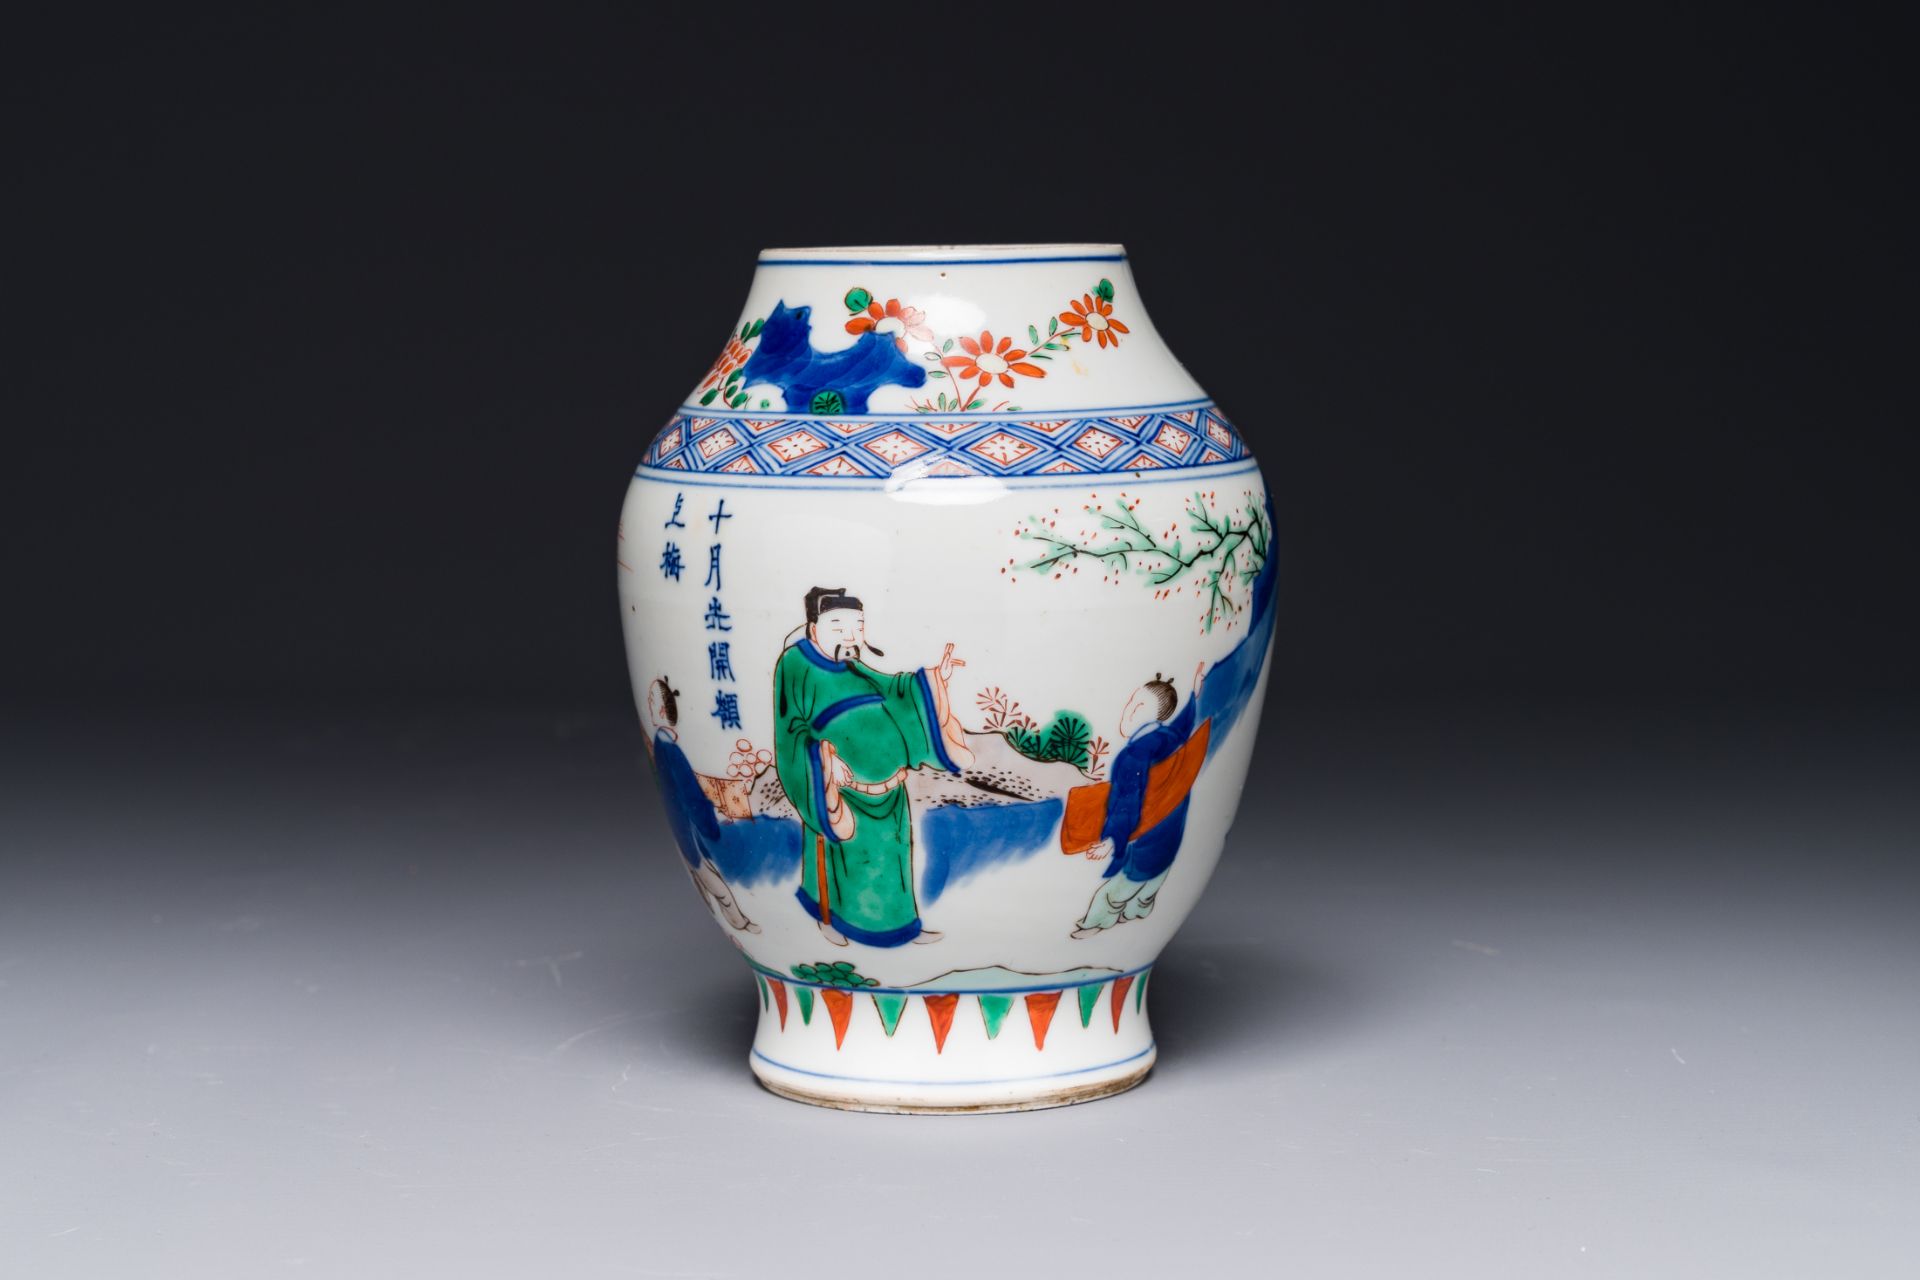 A Chinese wucai vase with figures and calligraphy, Transitional period